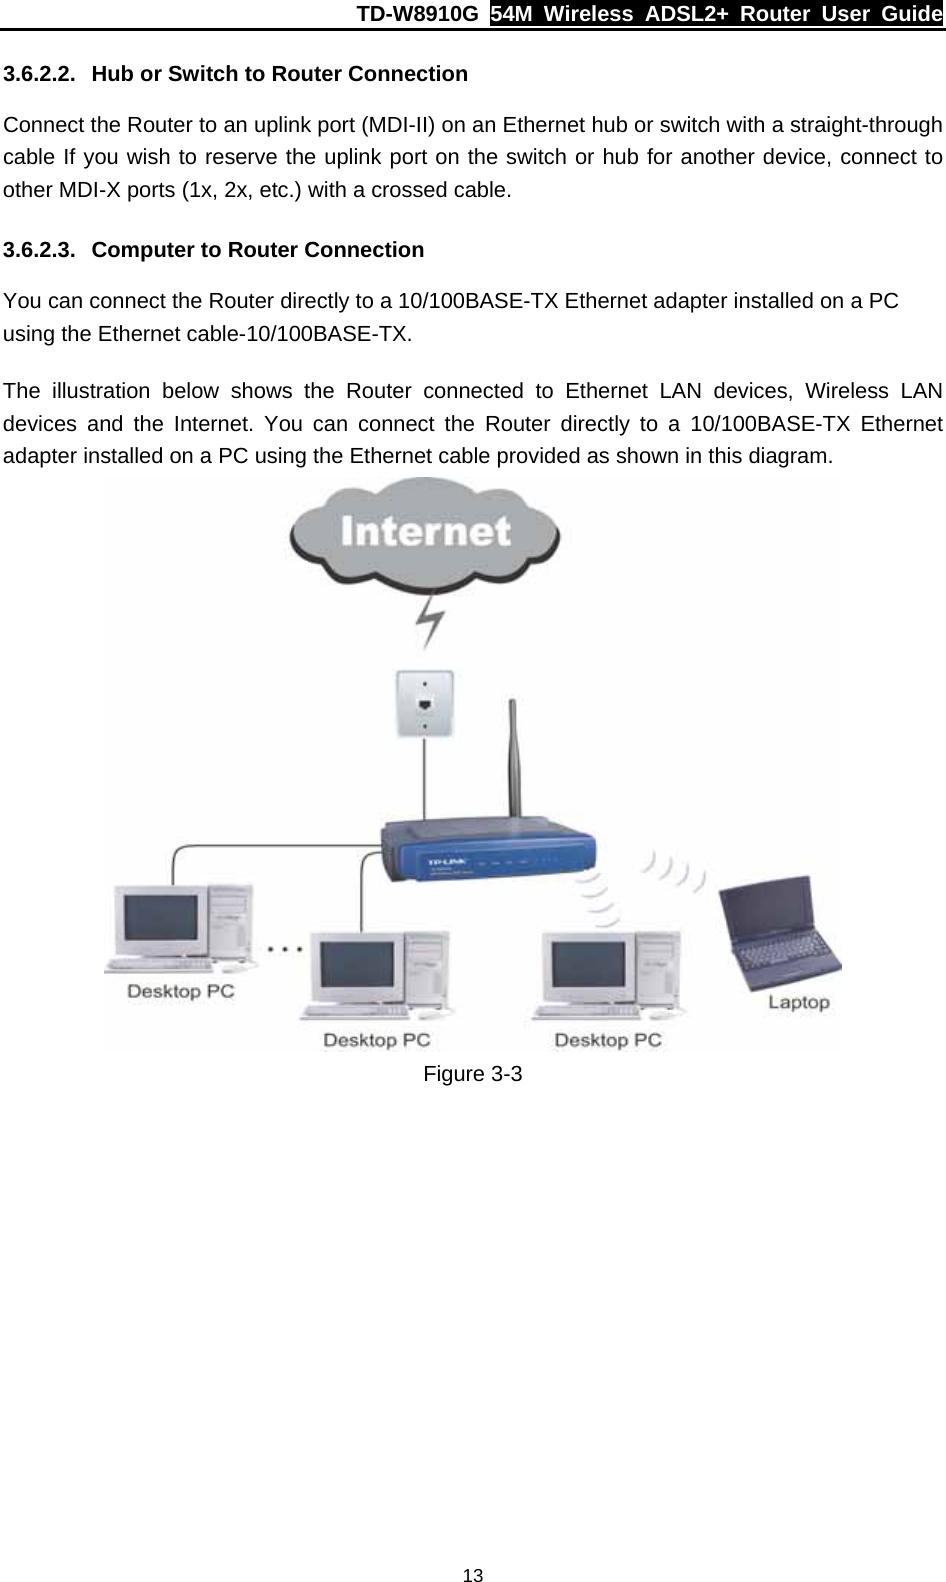 TD-W8910G  54M Wireless ADSL2+ Router User Guide  133.6.2.2.  Hub or Switch to Router Connection Connect the Router to an uplink port (MDI-II) on an Ethernet hub or switch with a straight-through cable If you wish to reserve the uplink port on the switch or hub for another device, connect to other MDI-X ports (1x, 2x, etc.) with a crossed cable. 3.6.2.3.  Computer to Router Connection You can connect the Router directly to a 10/100BASE-TX Ethernet adapter installed on a PC using the Ethernet cable-10/100BASE-TX. The illustration below shows the Router connected to Ethernet LAN devices, Wireless LAN devices and the Internet. You can connect the Router directly to a 10/100BASE-TX Ethernet adapter installed on a PC using the Ethernet cable provided as shown in this diagram.  Figure 3-3 